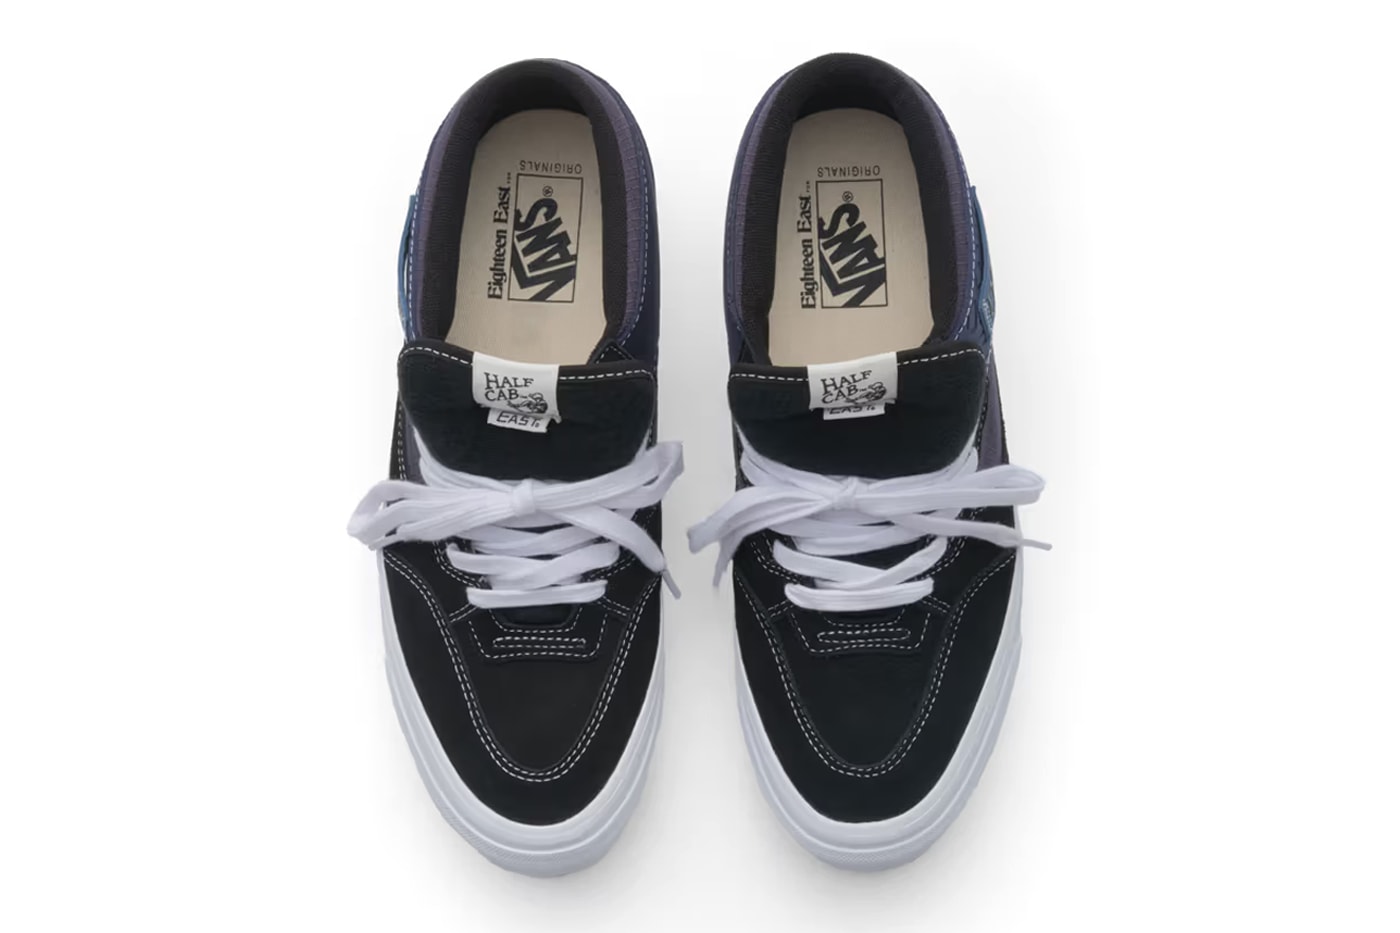 18 East Remakes the Vans Half Cab in Three New Colorways